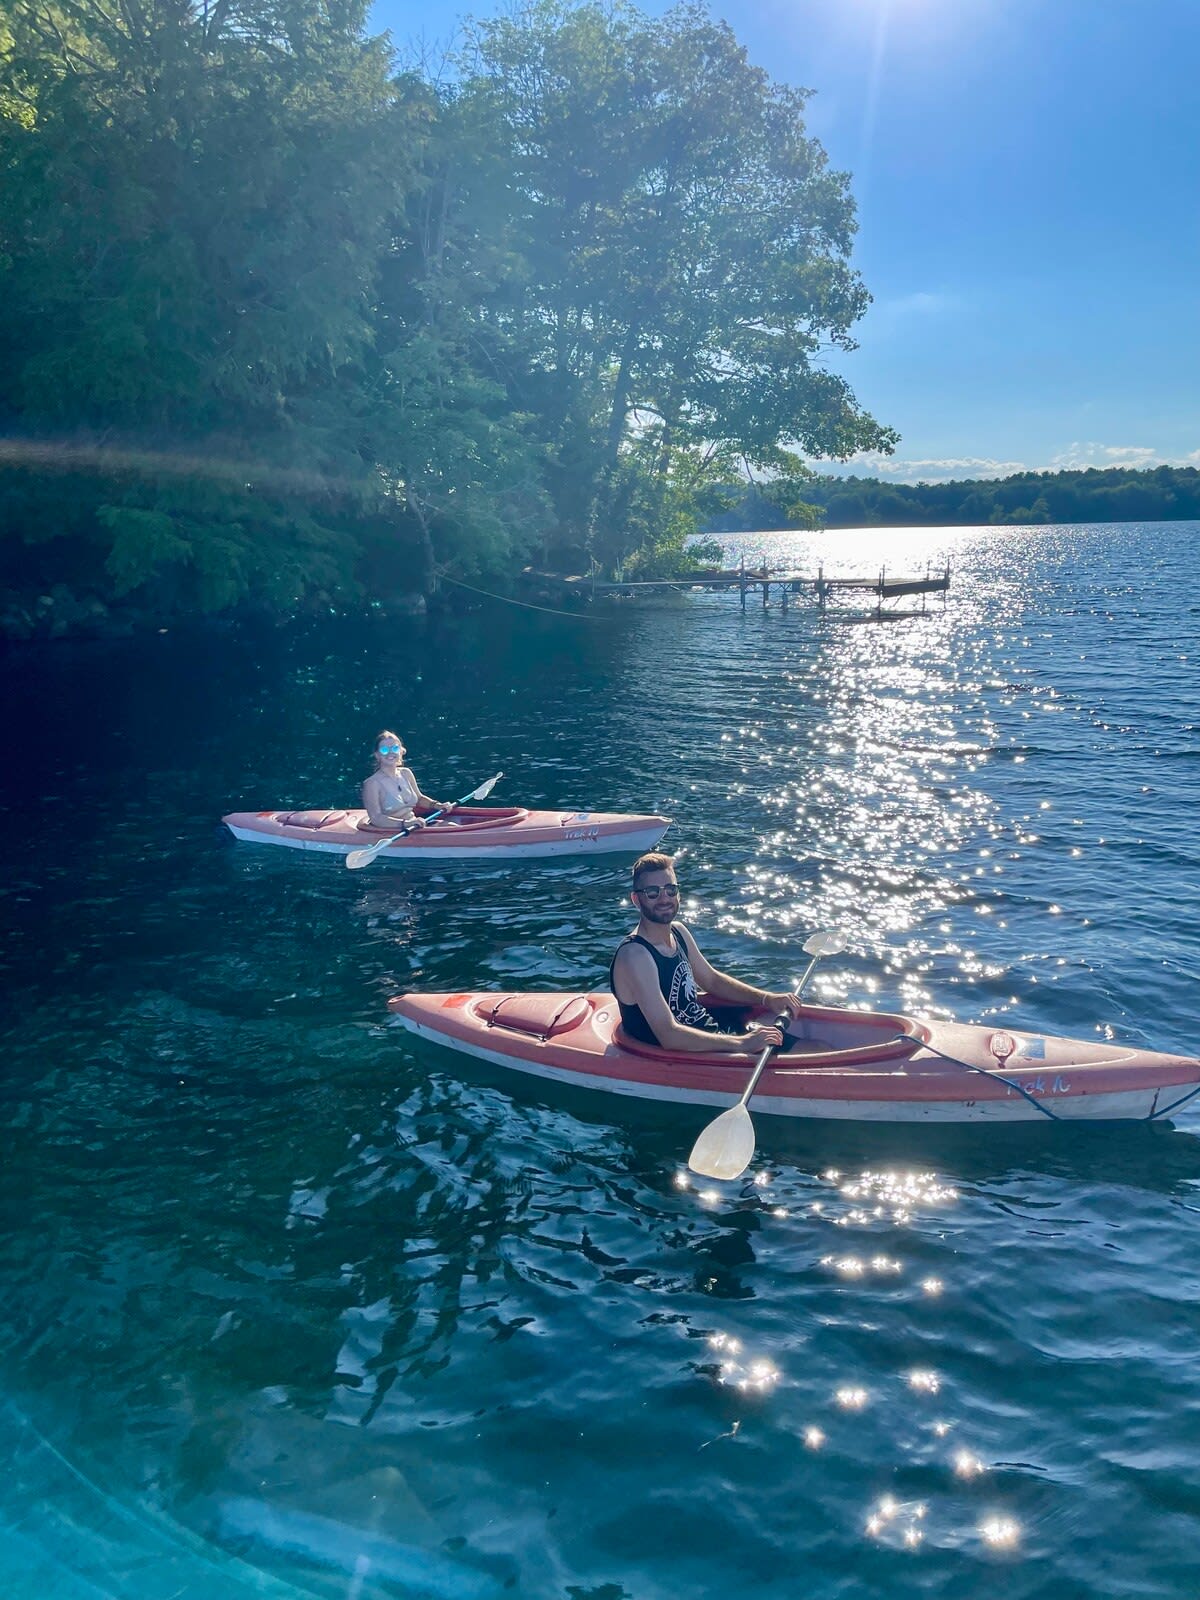 Free canoes and kayaks make it easy to explore the 1400 acre lake.